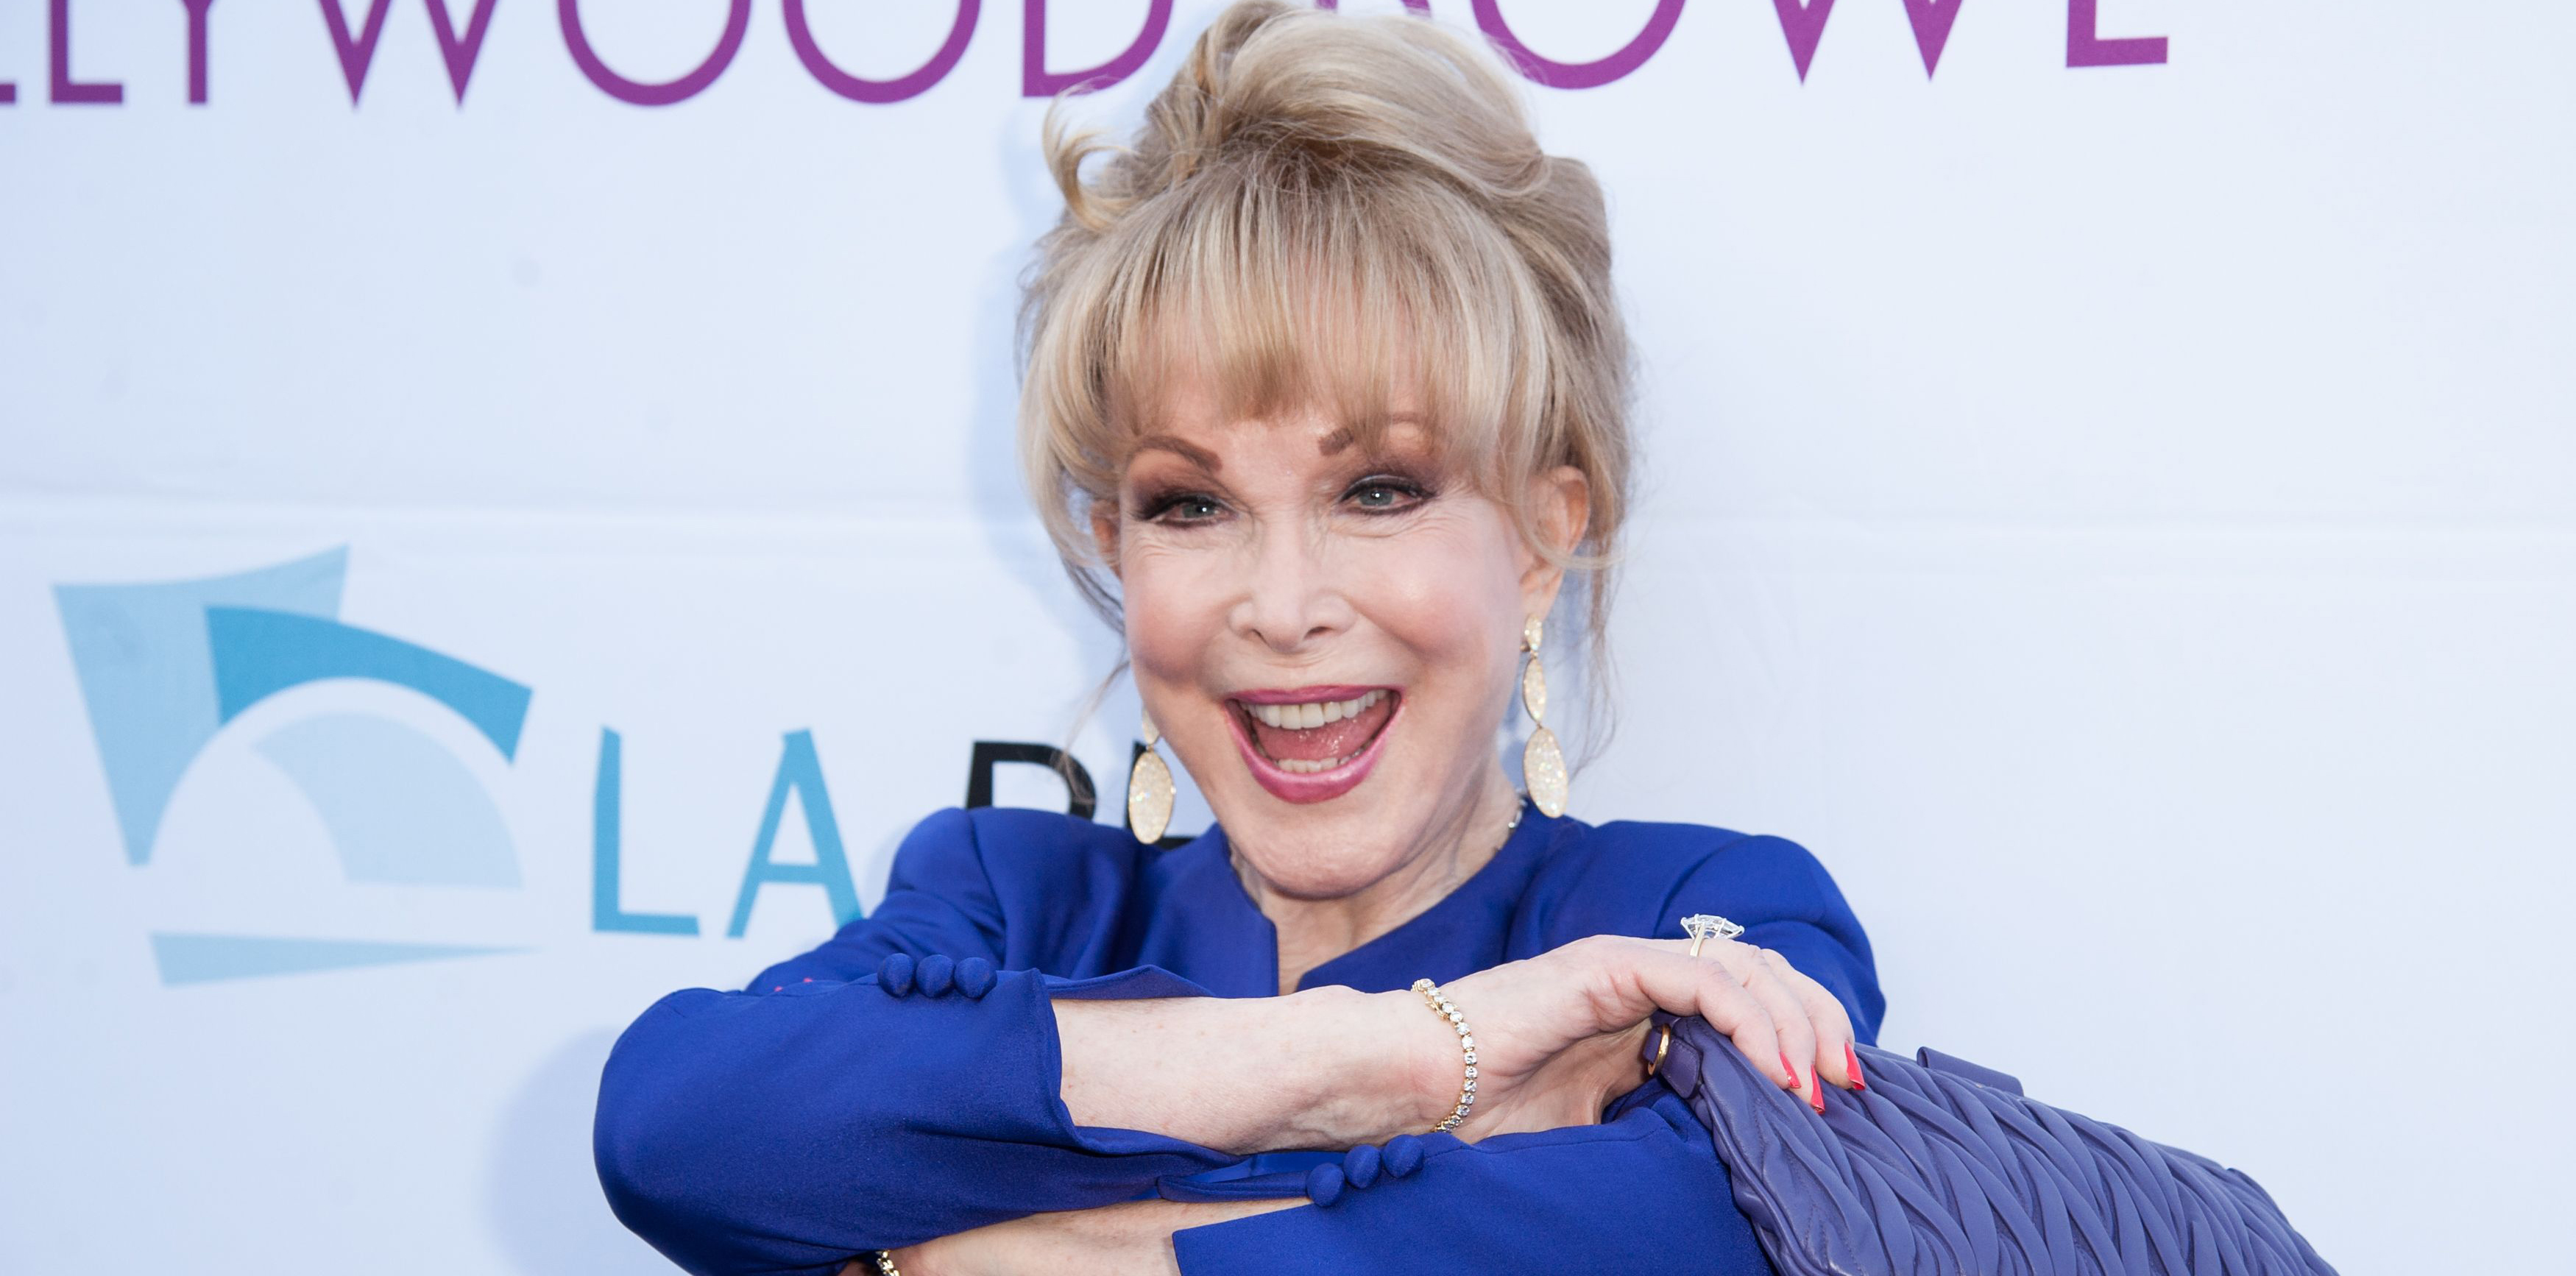 X Video Of Jacqueline - I Dream of Jeannie' Star Barbara Eden: A Look Back at Her Life